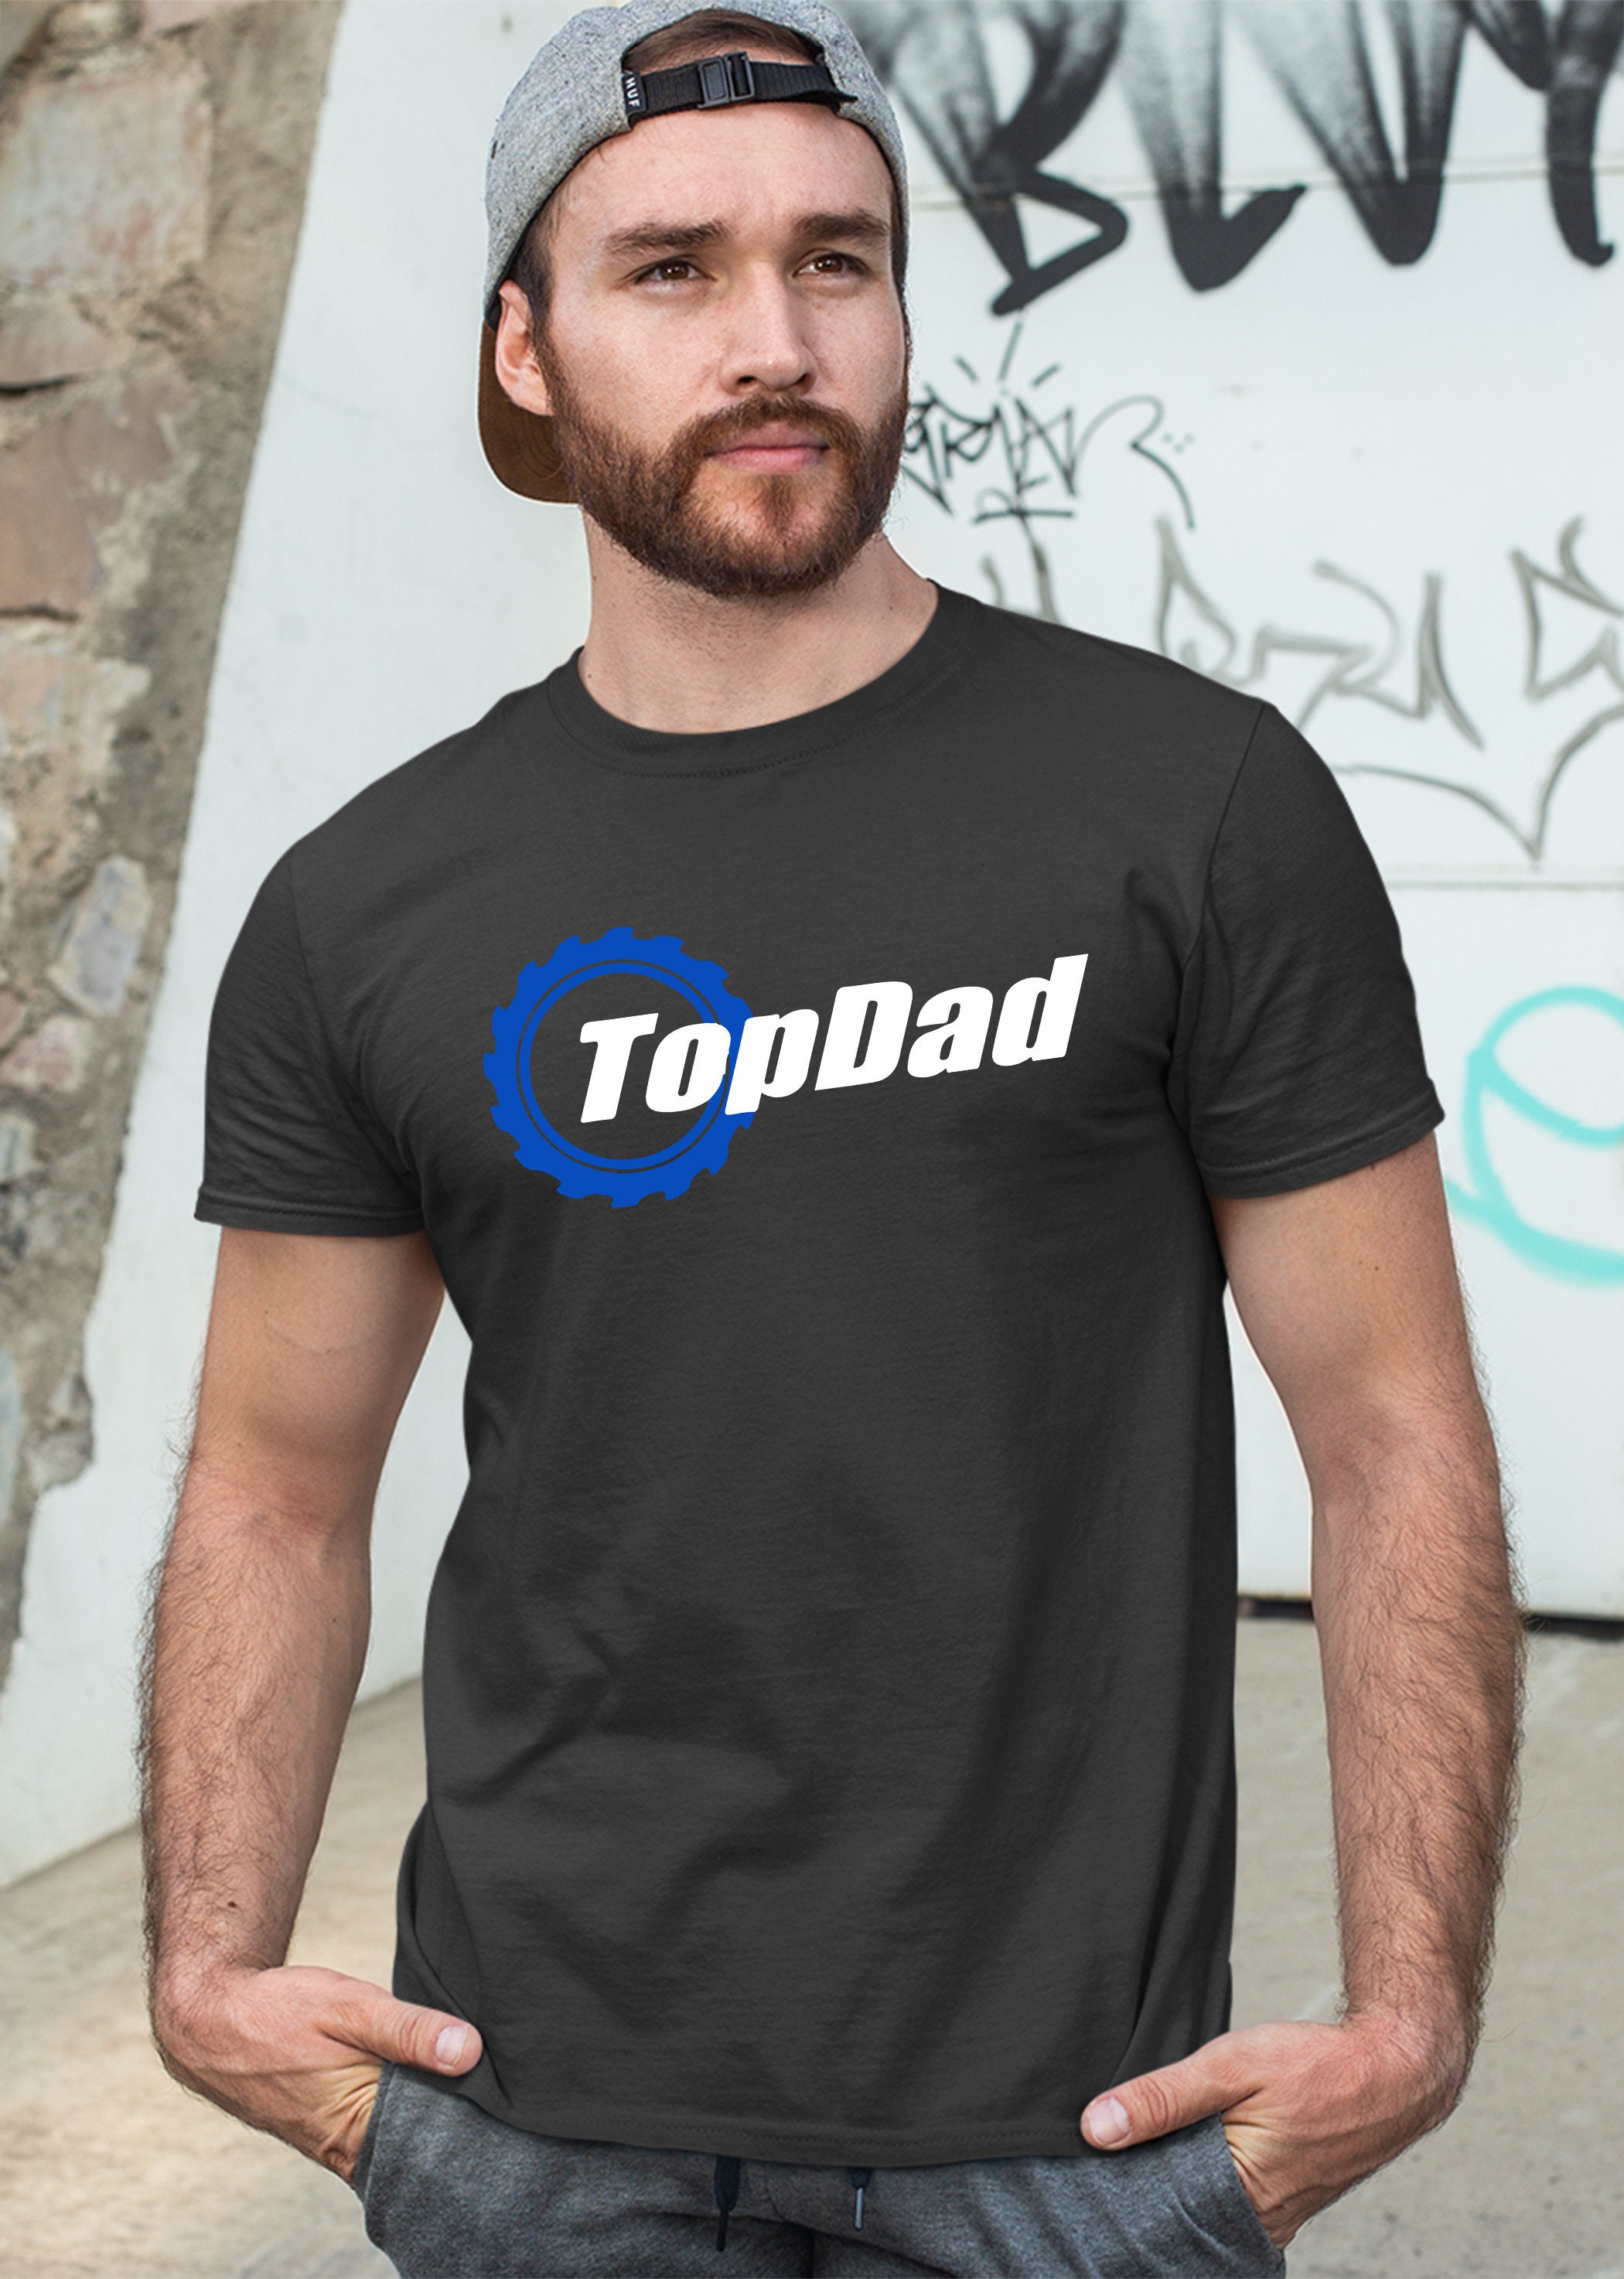 Top Dad Gear Car Fan Tv Show Father’s Day Unisex T-Shirt